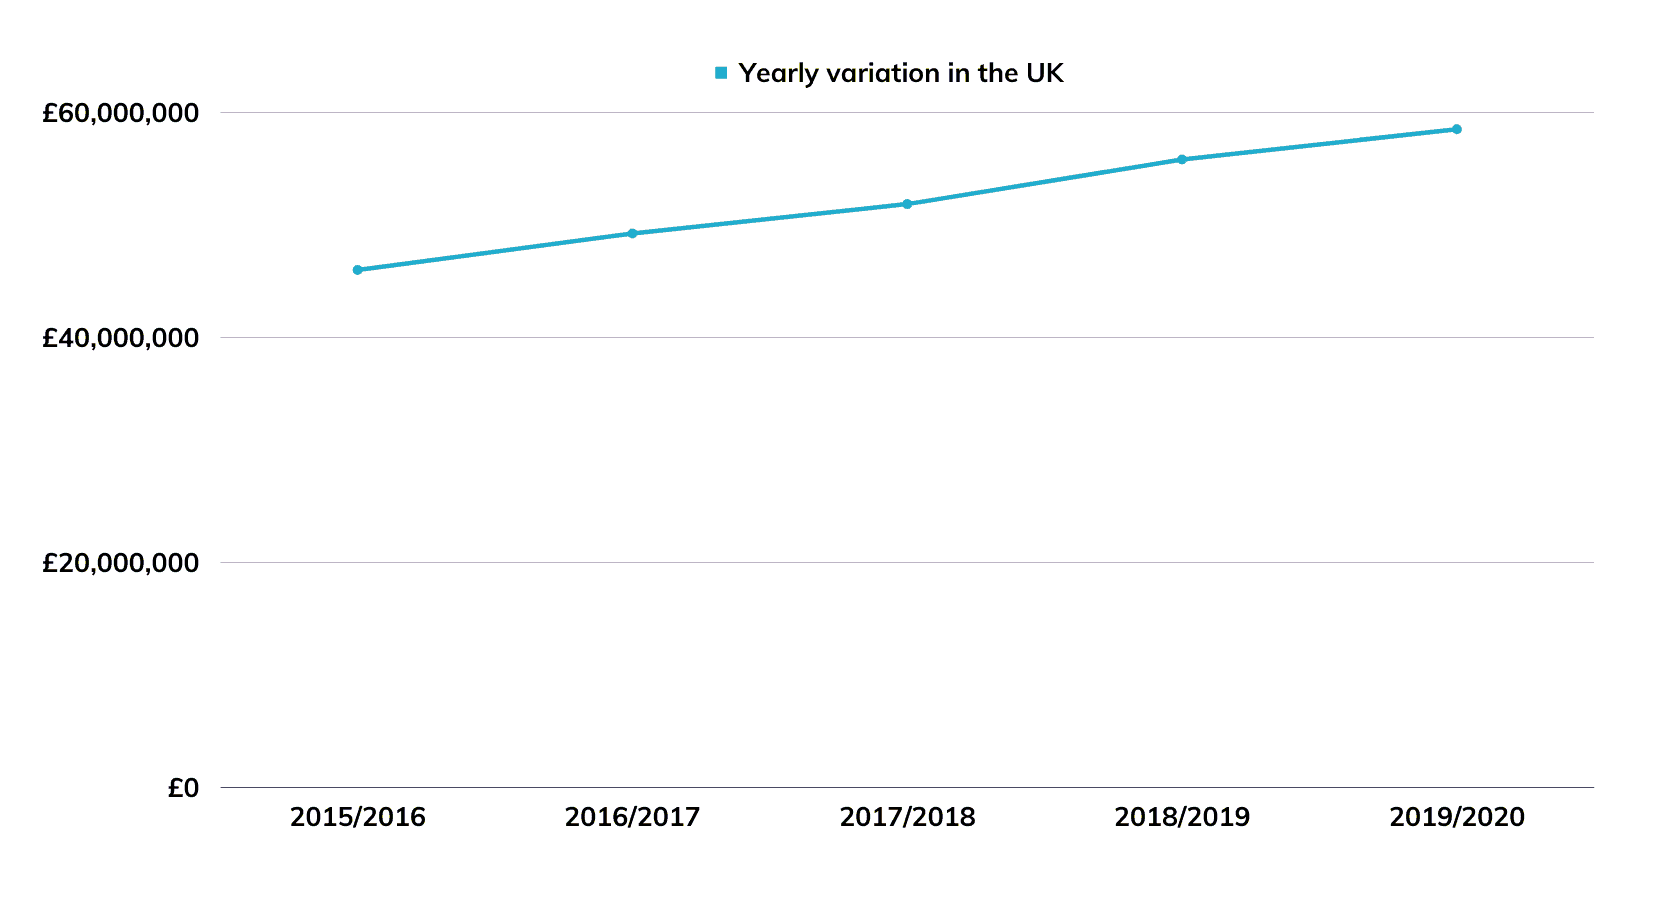 Figure 1 - Yearly variation in spending in the UK between 2015/2016 and 2019/2020